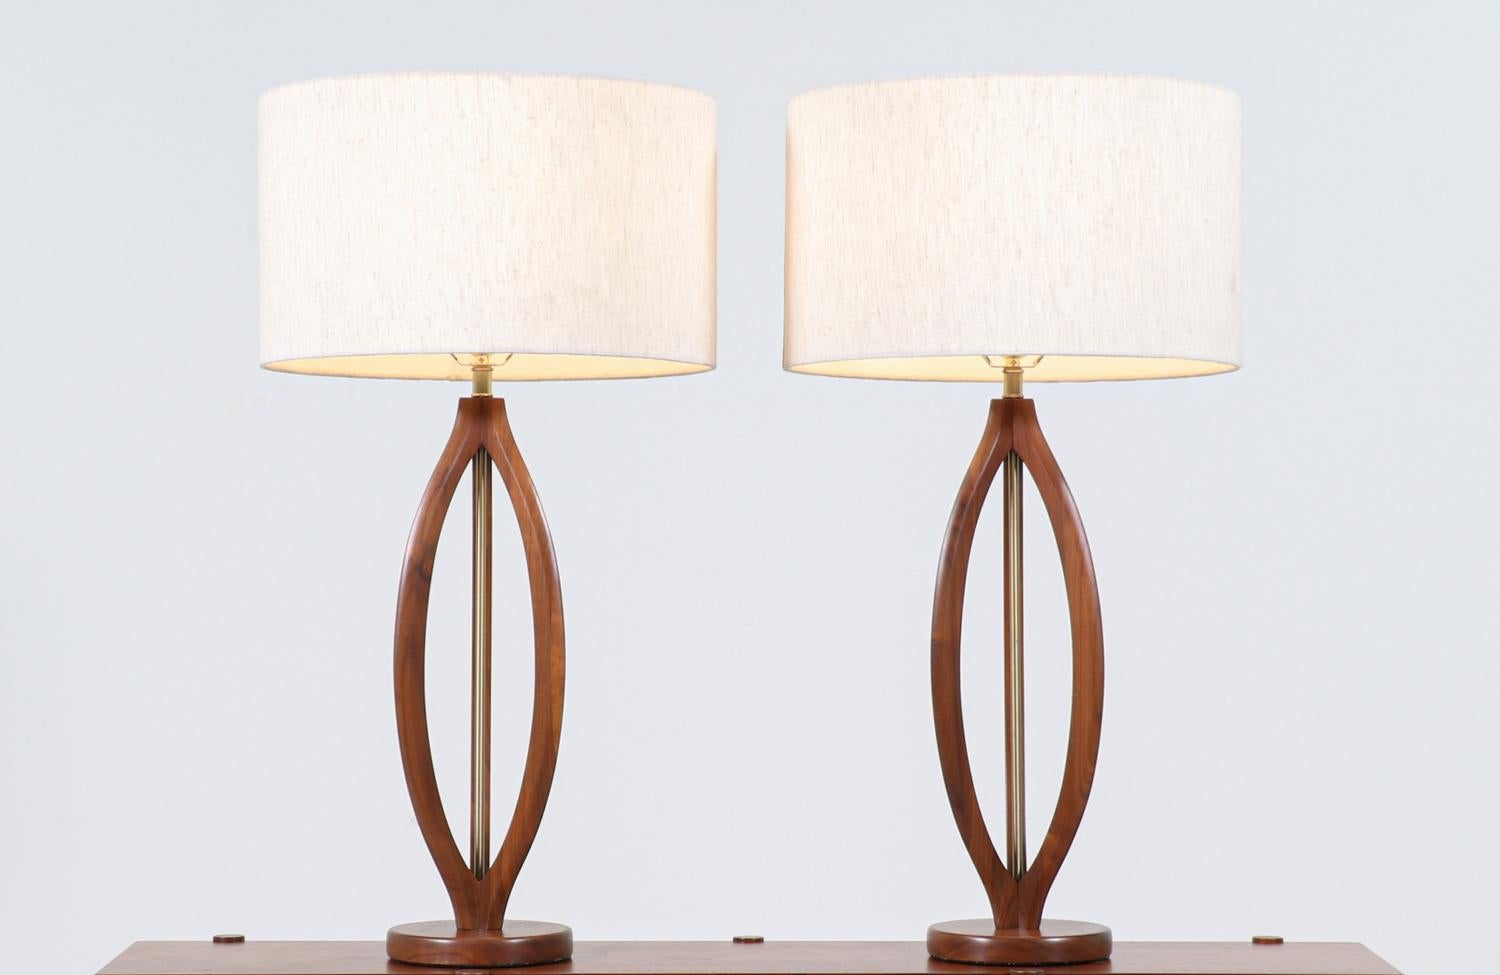 Mid-Century Modern sculpted walnut with brass accent table lamps

Dimensions
34in H x 7.50in W
Lamp shade: 10in H x 17in W.
  